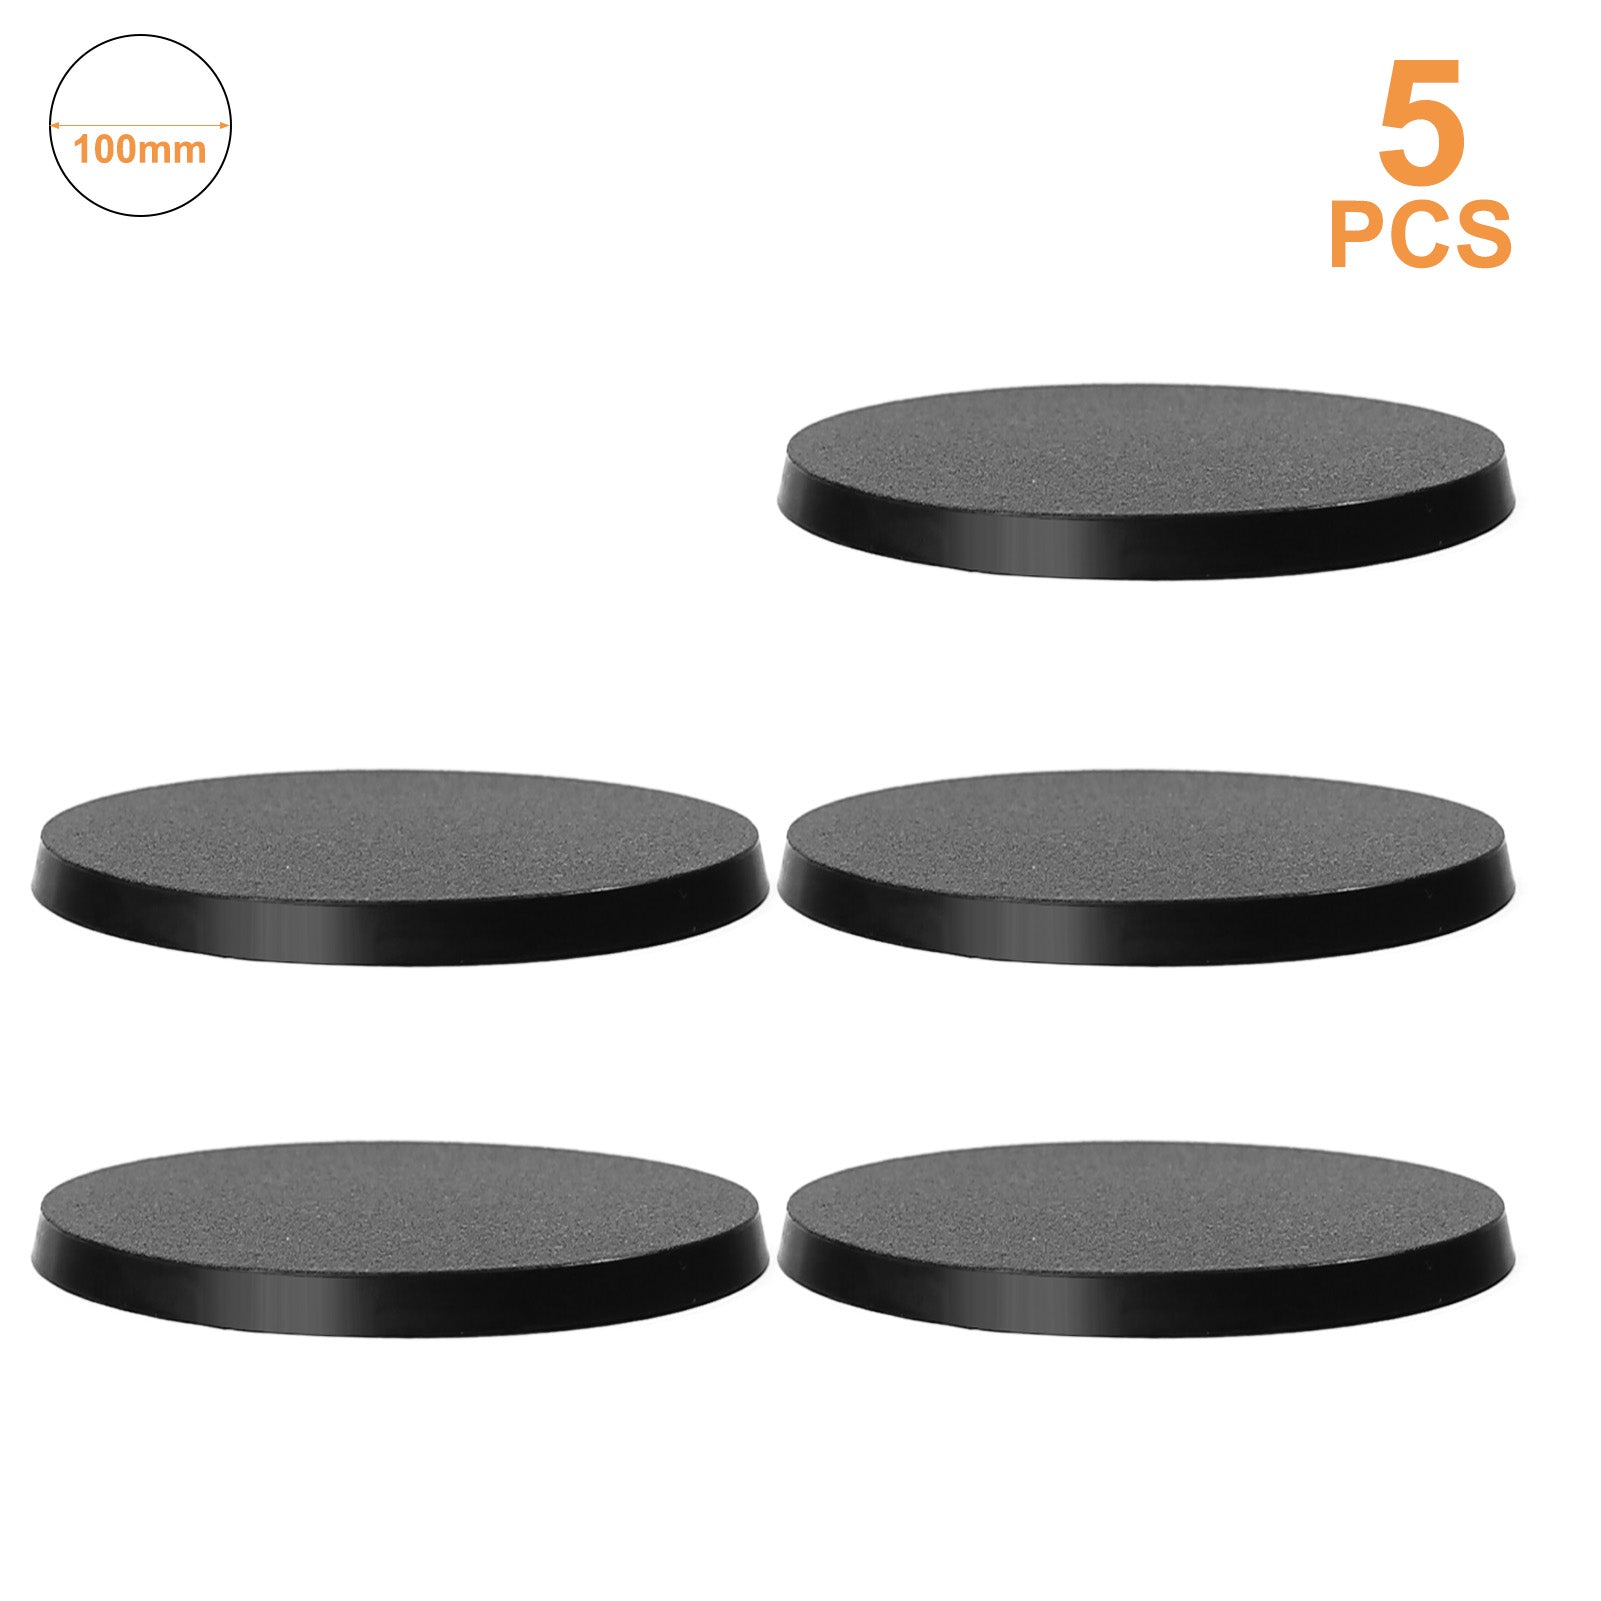 MB11 Various Size 60mm 80mm 90mm 100mm Round ABS Model Bases for Wargames Table Games